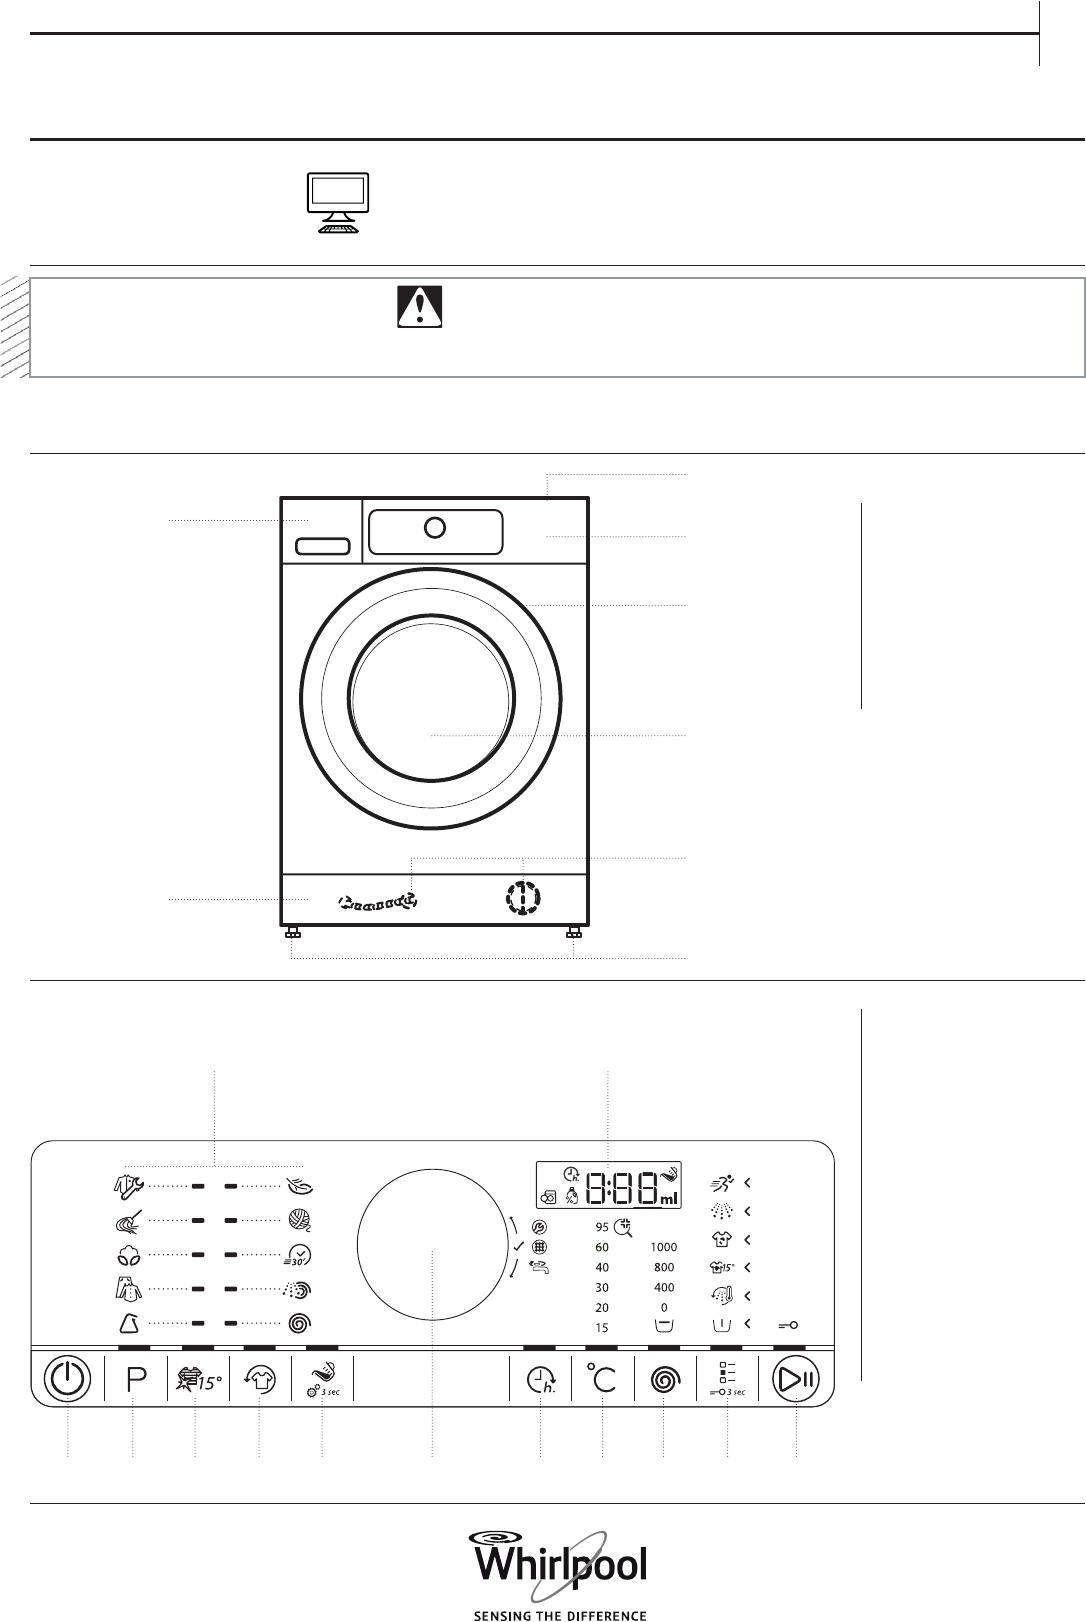 Manual Whirlpool AWG 912 S-PRO (page 1 of 8) (English)